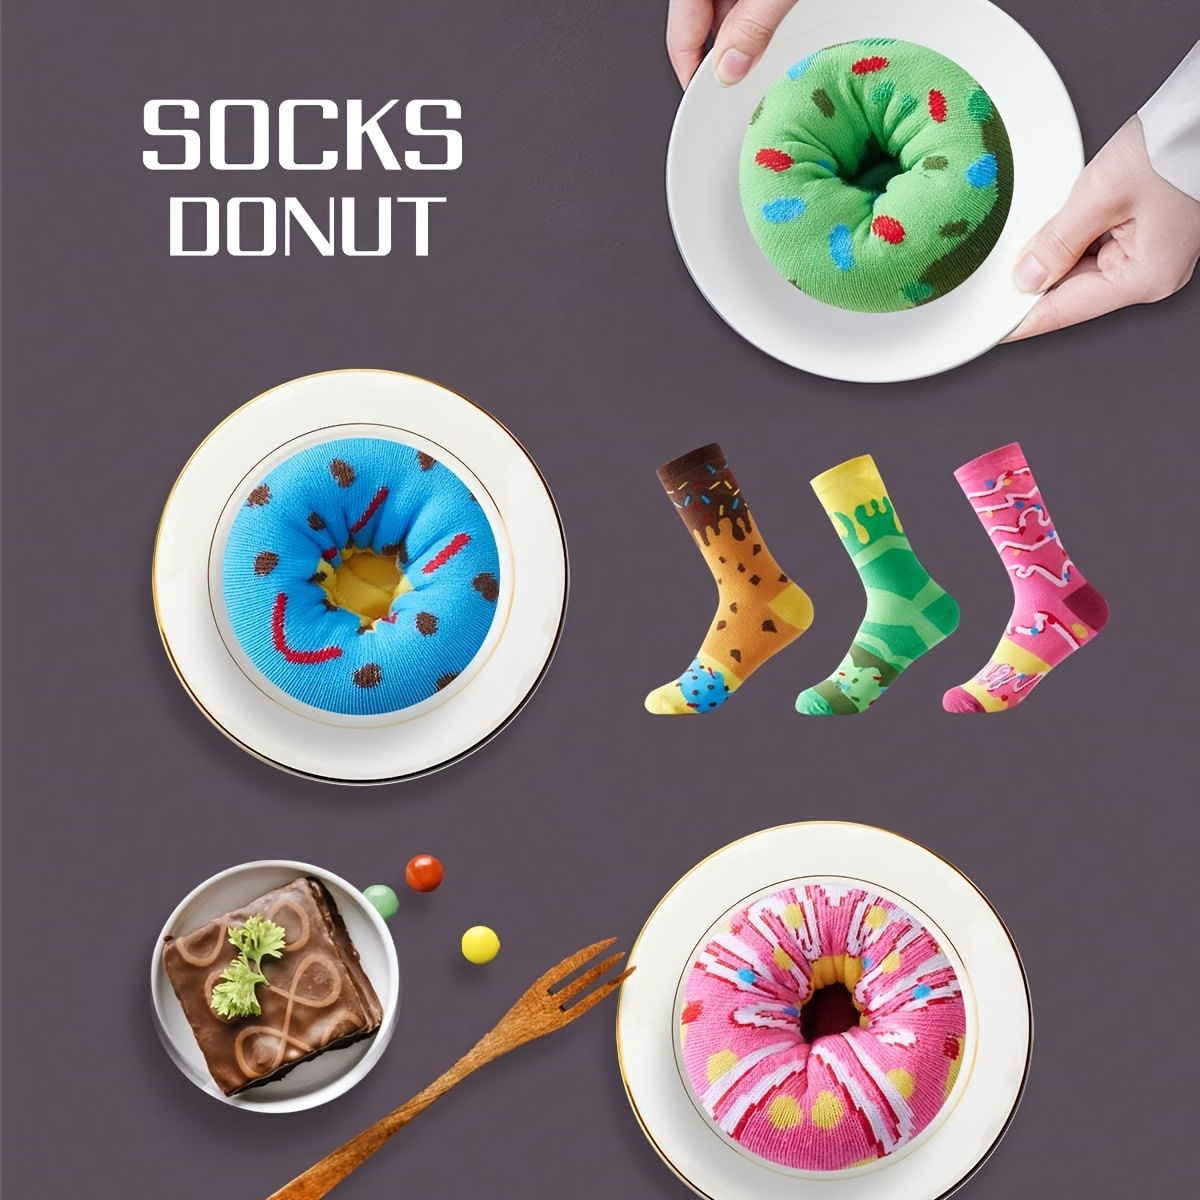 

3 Pairs Of Men's Fun Novel Donut Design Anti Odor & Sweat Absorption Fashion Crew Socks, Comfy & Breathable Socks, For Gifts, Parties And Daily Wearing